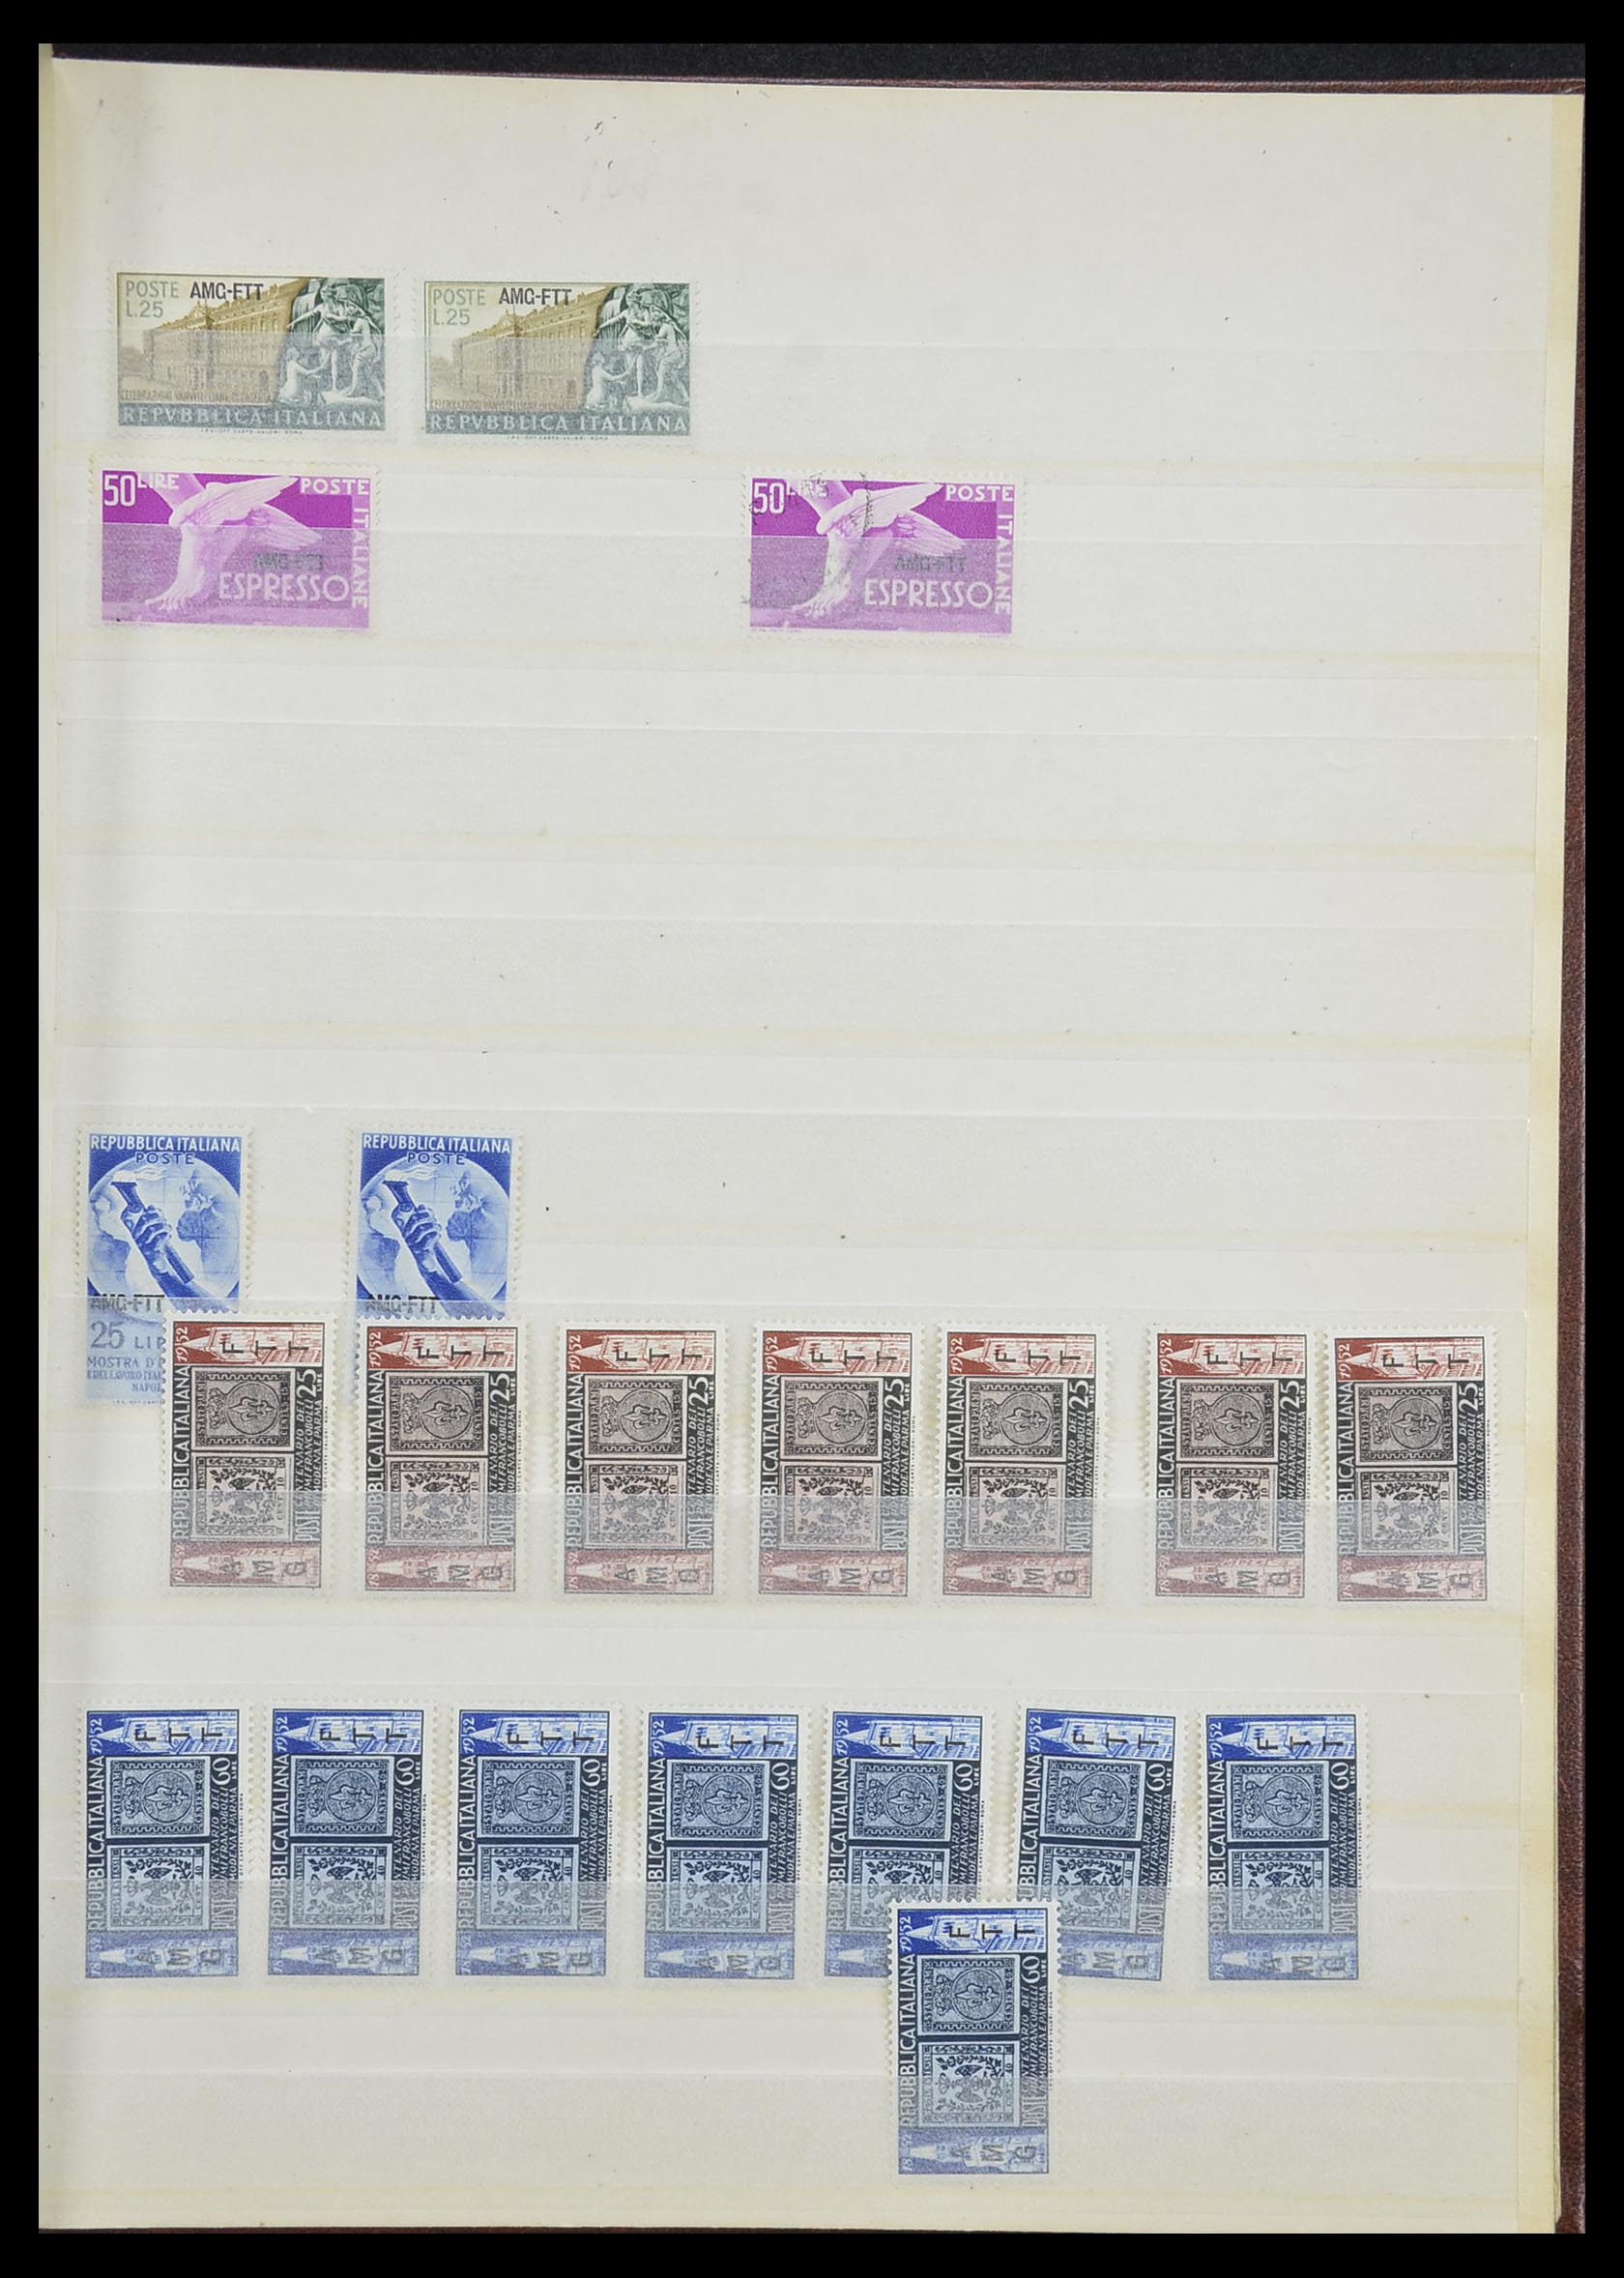 33917 009 - Stamp collection 33917 Triest, Campione and territories 1890-1960.